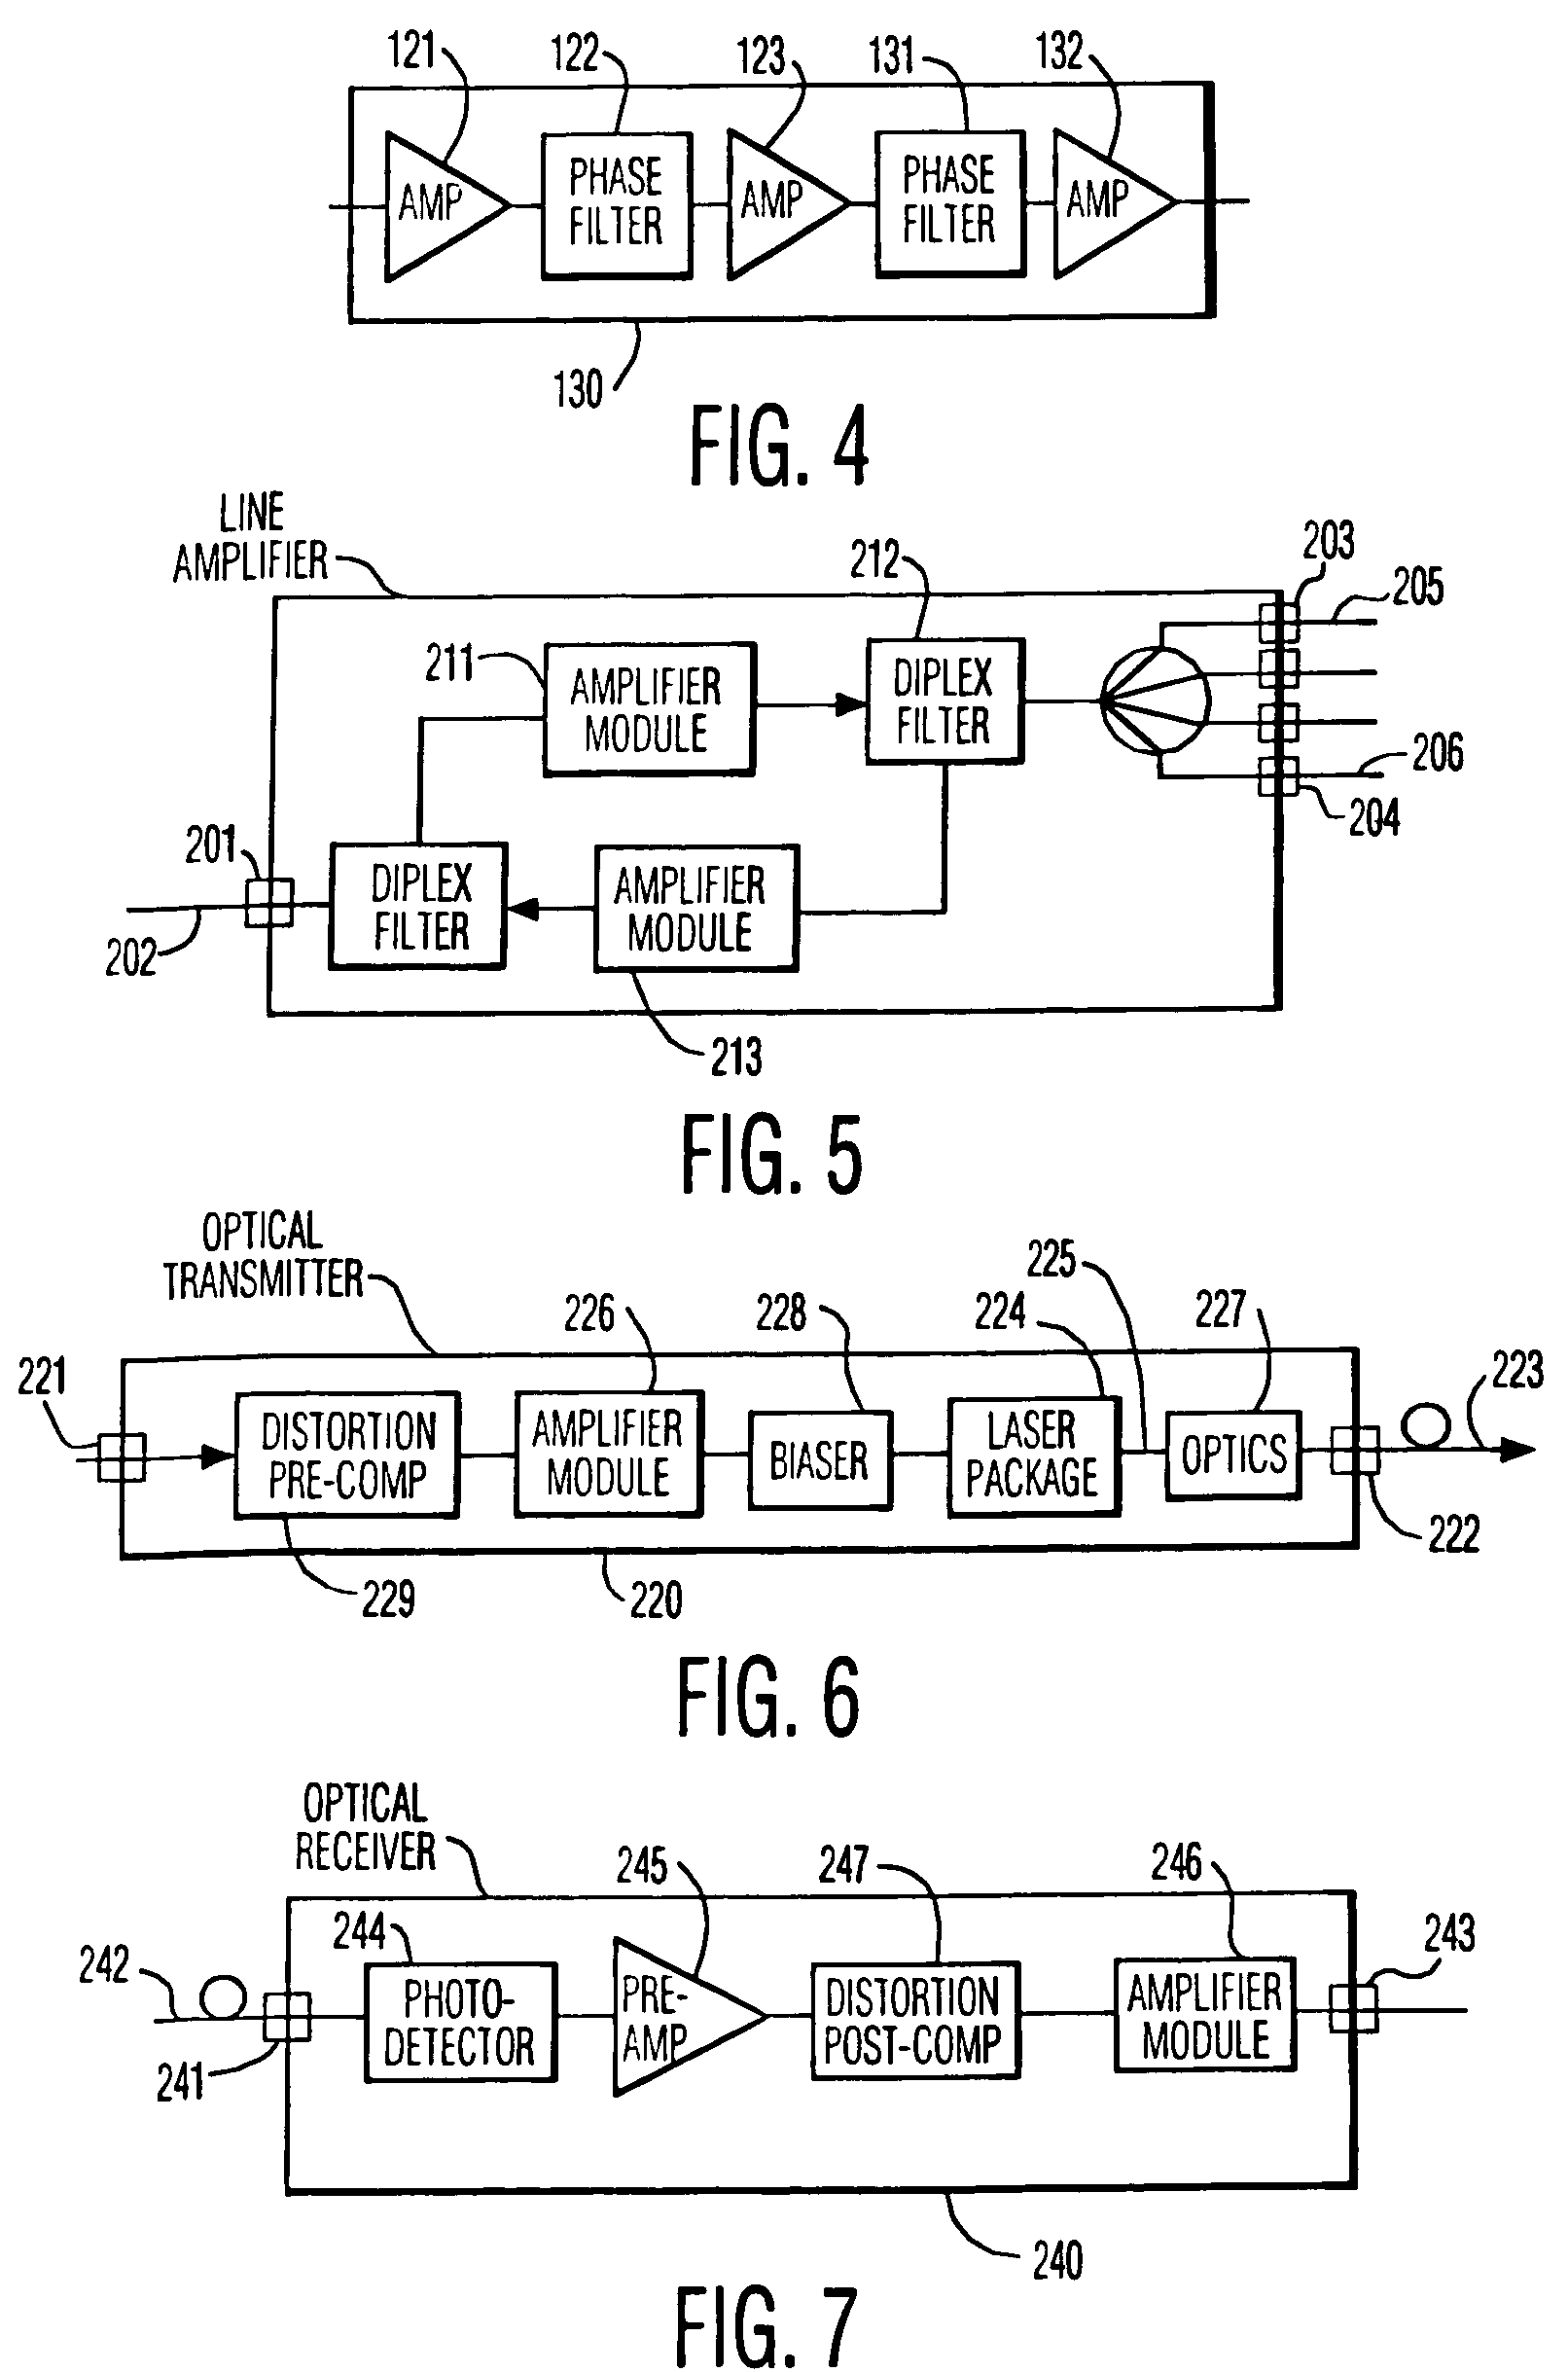 Amplifier composite triple beat (CTB) reduction by phase filtering